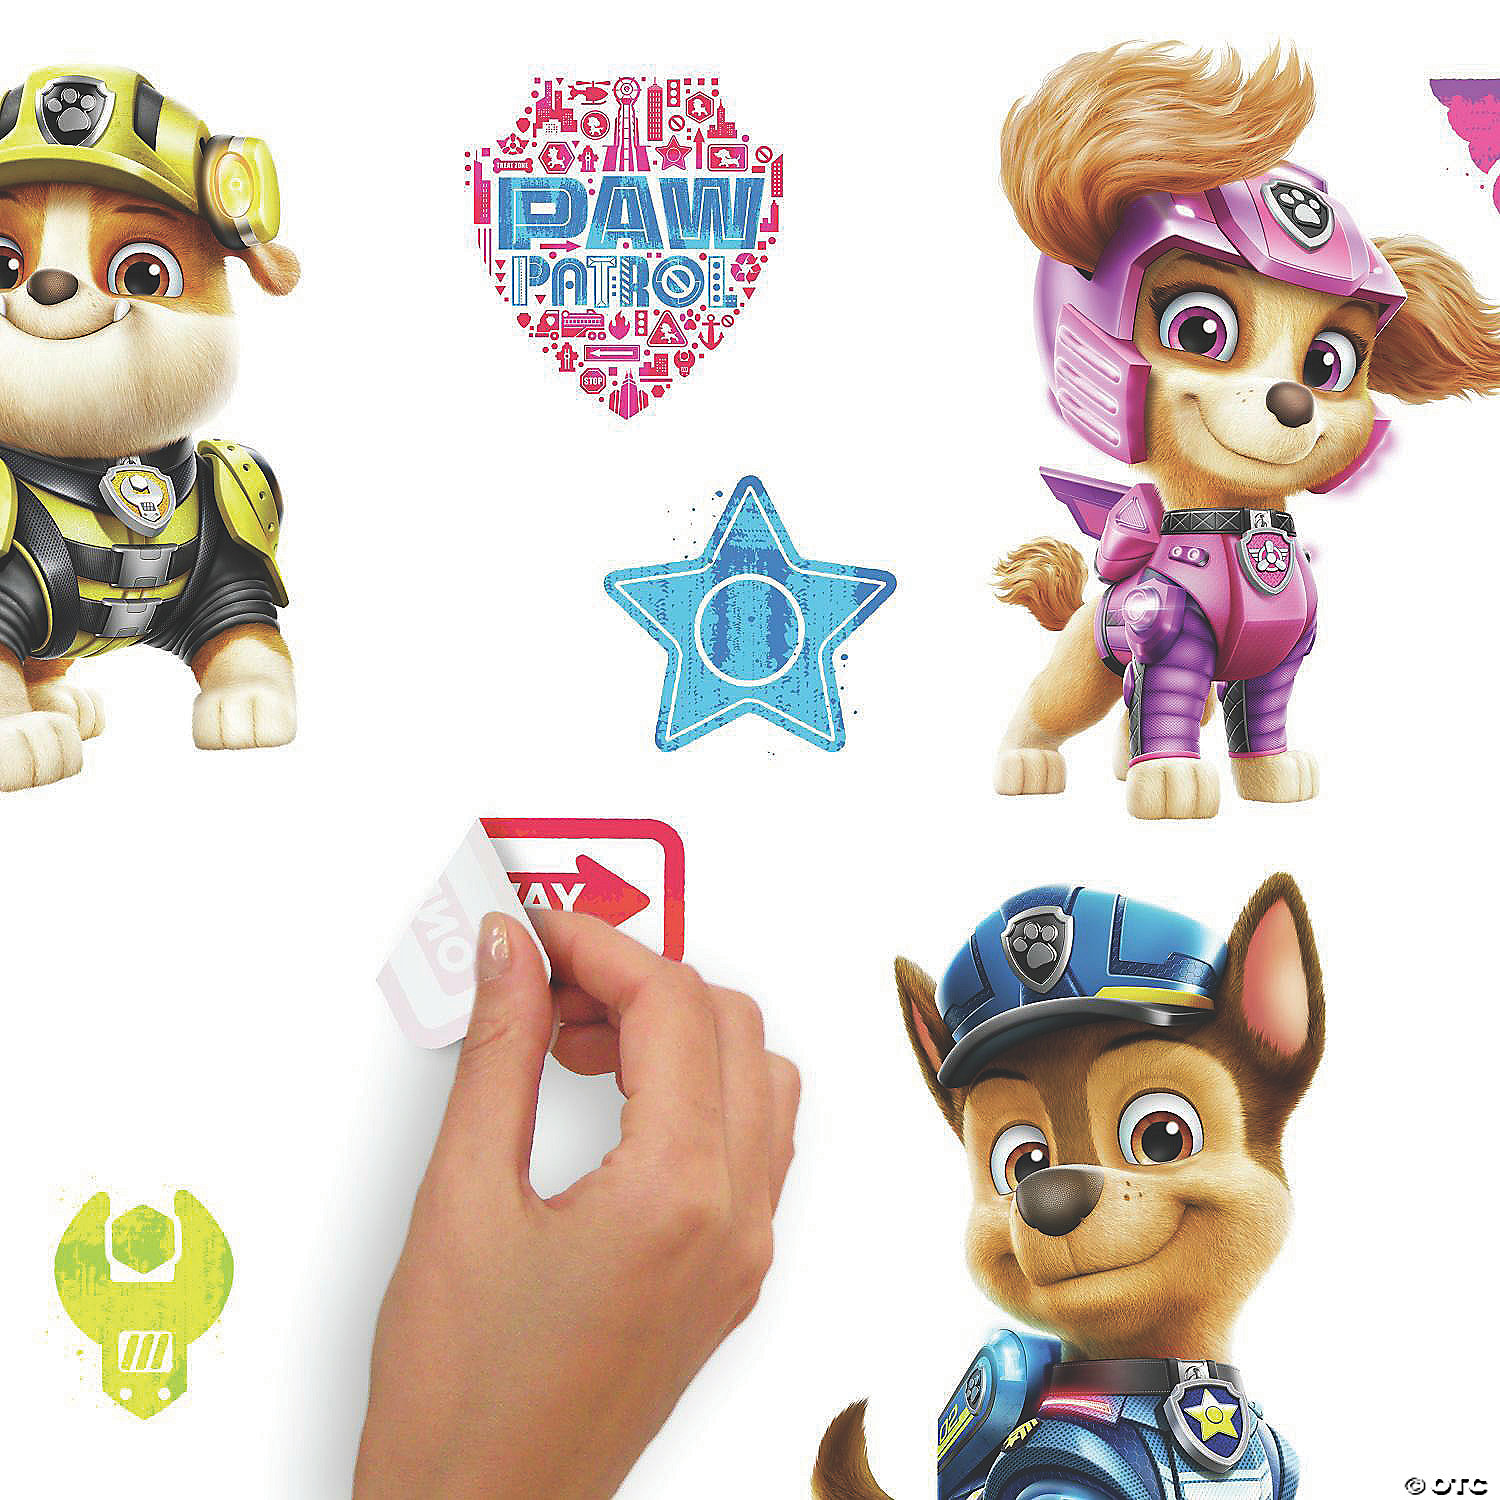 PAW PATROL PHOTO PAPER WALL STICKER WALL DECAL